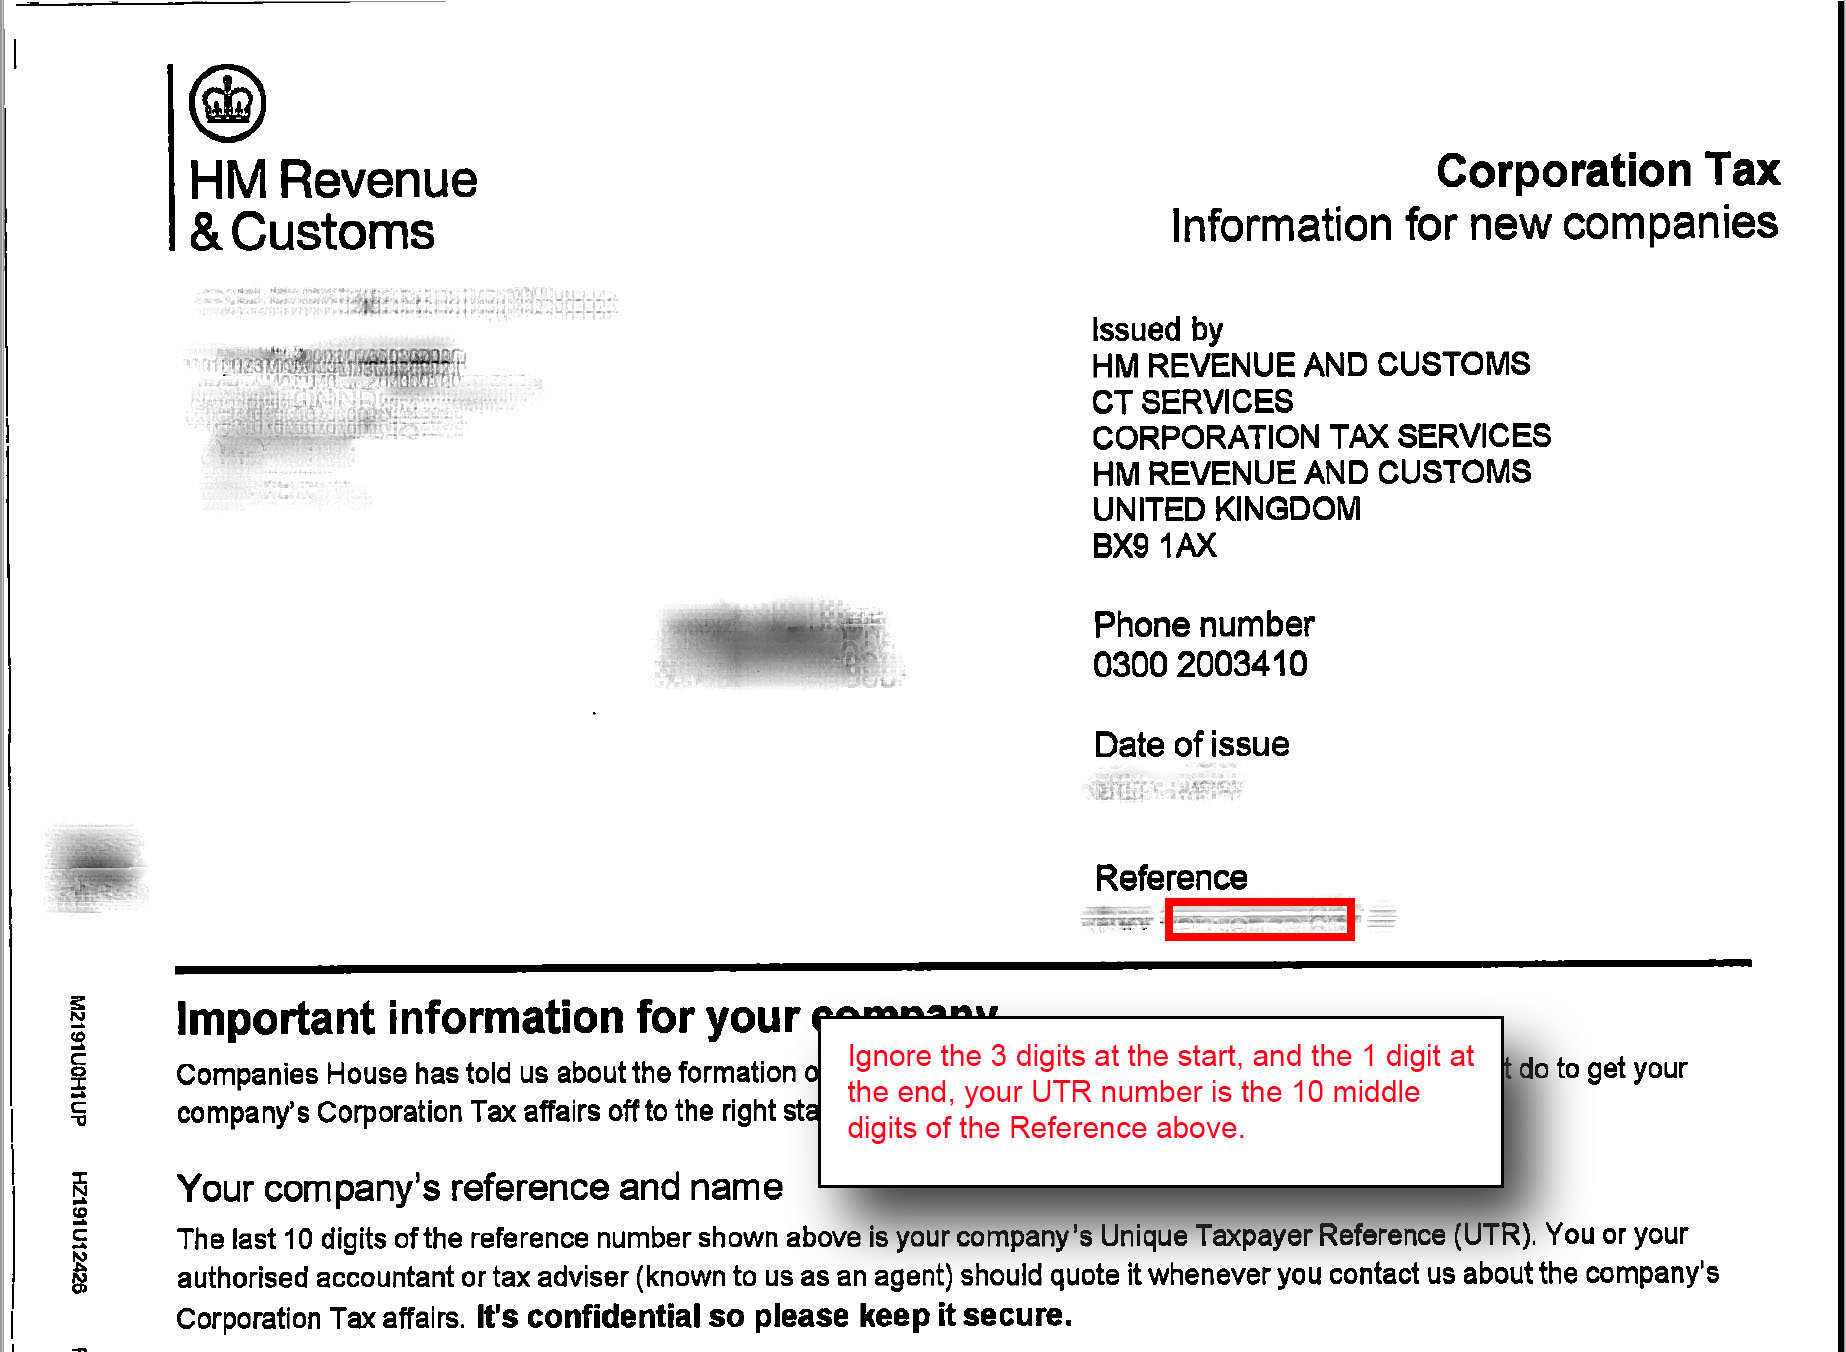 Do Hmrc Send Emails About Tax Refunds